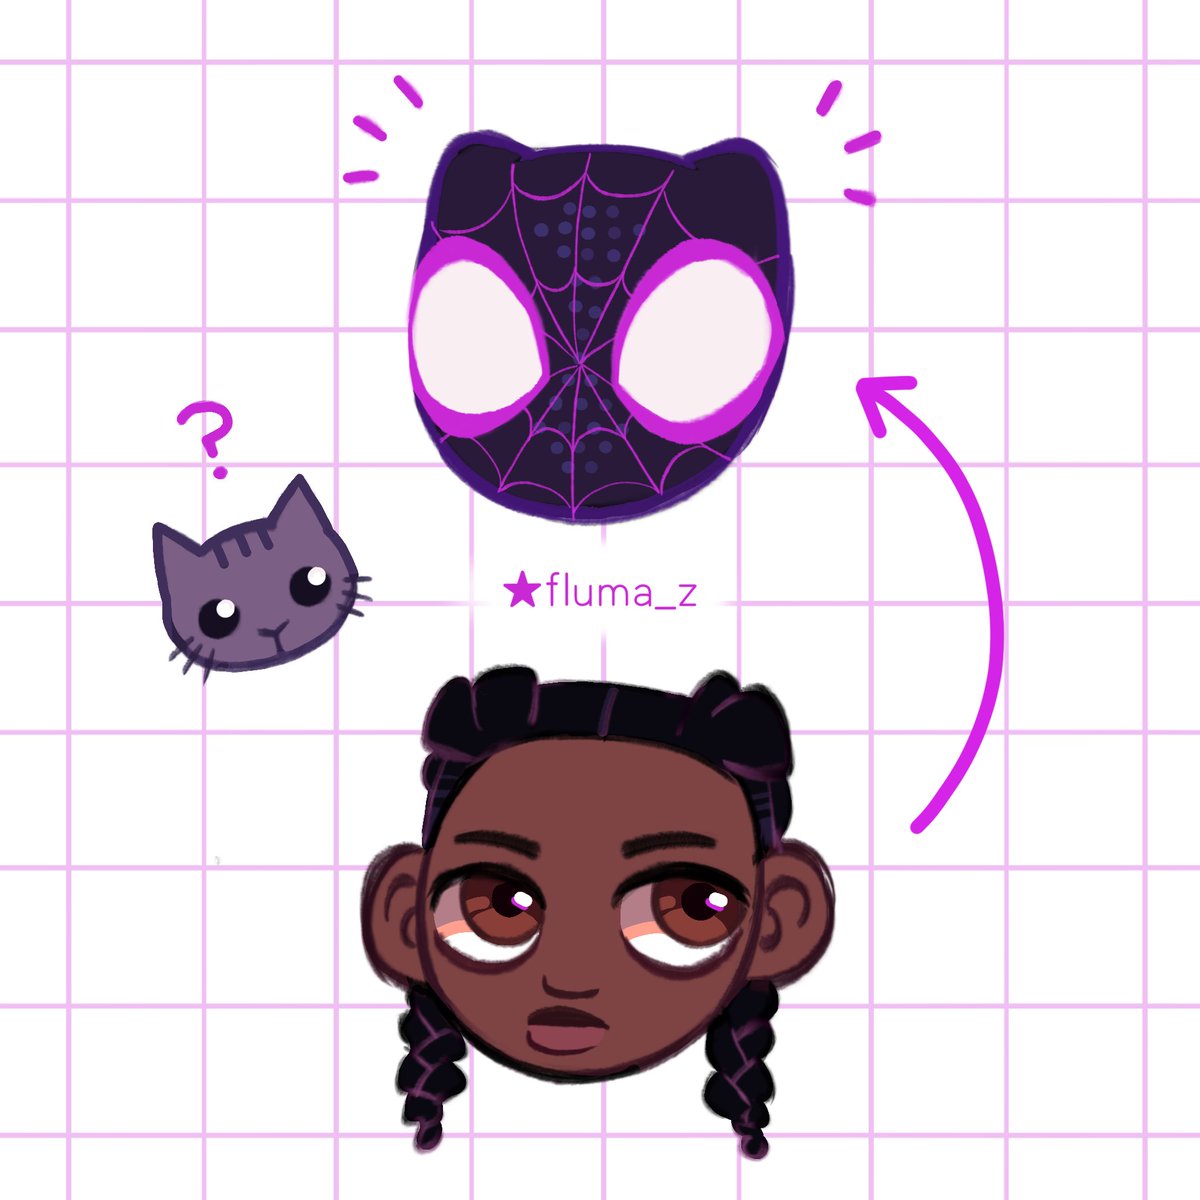 Shower thoughts ≽^•⩊•^≼
#MilesMorales #IntoTheSpiderVerse #atsv